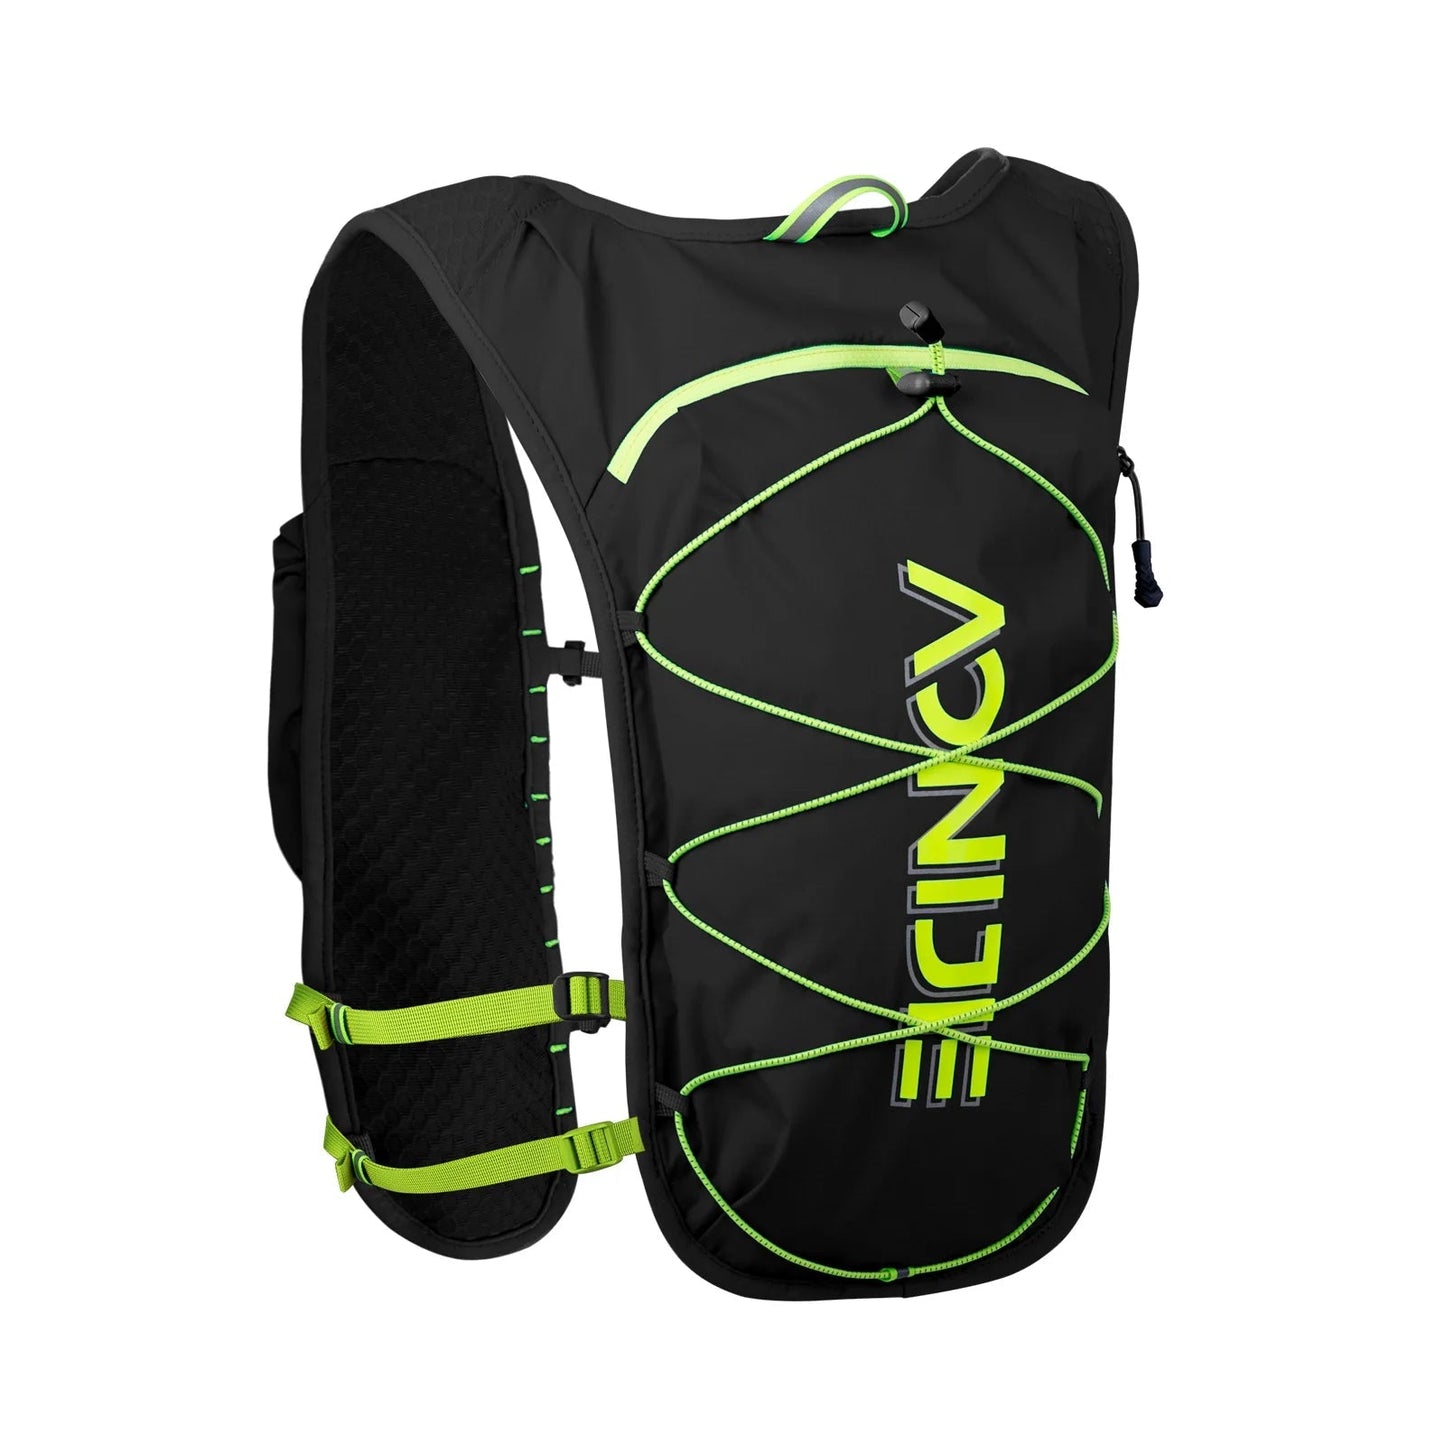 AONIJIE C9107 Running Hydration Backpack